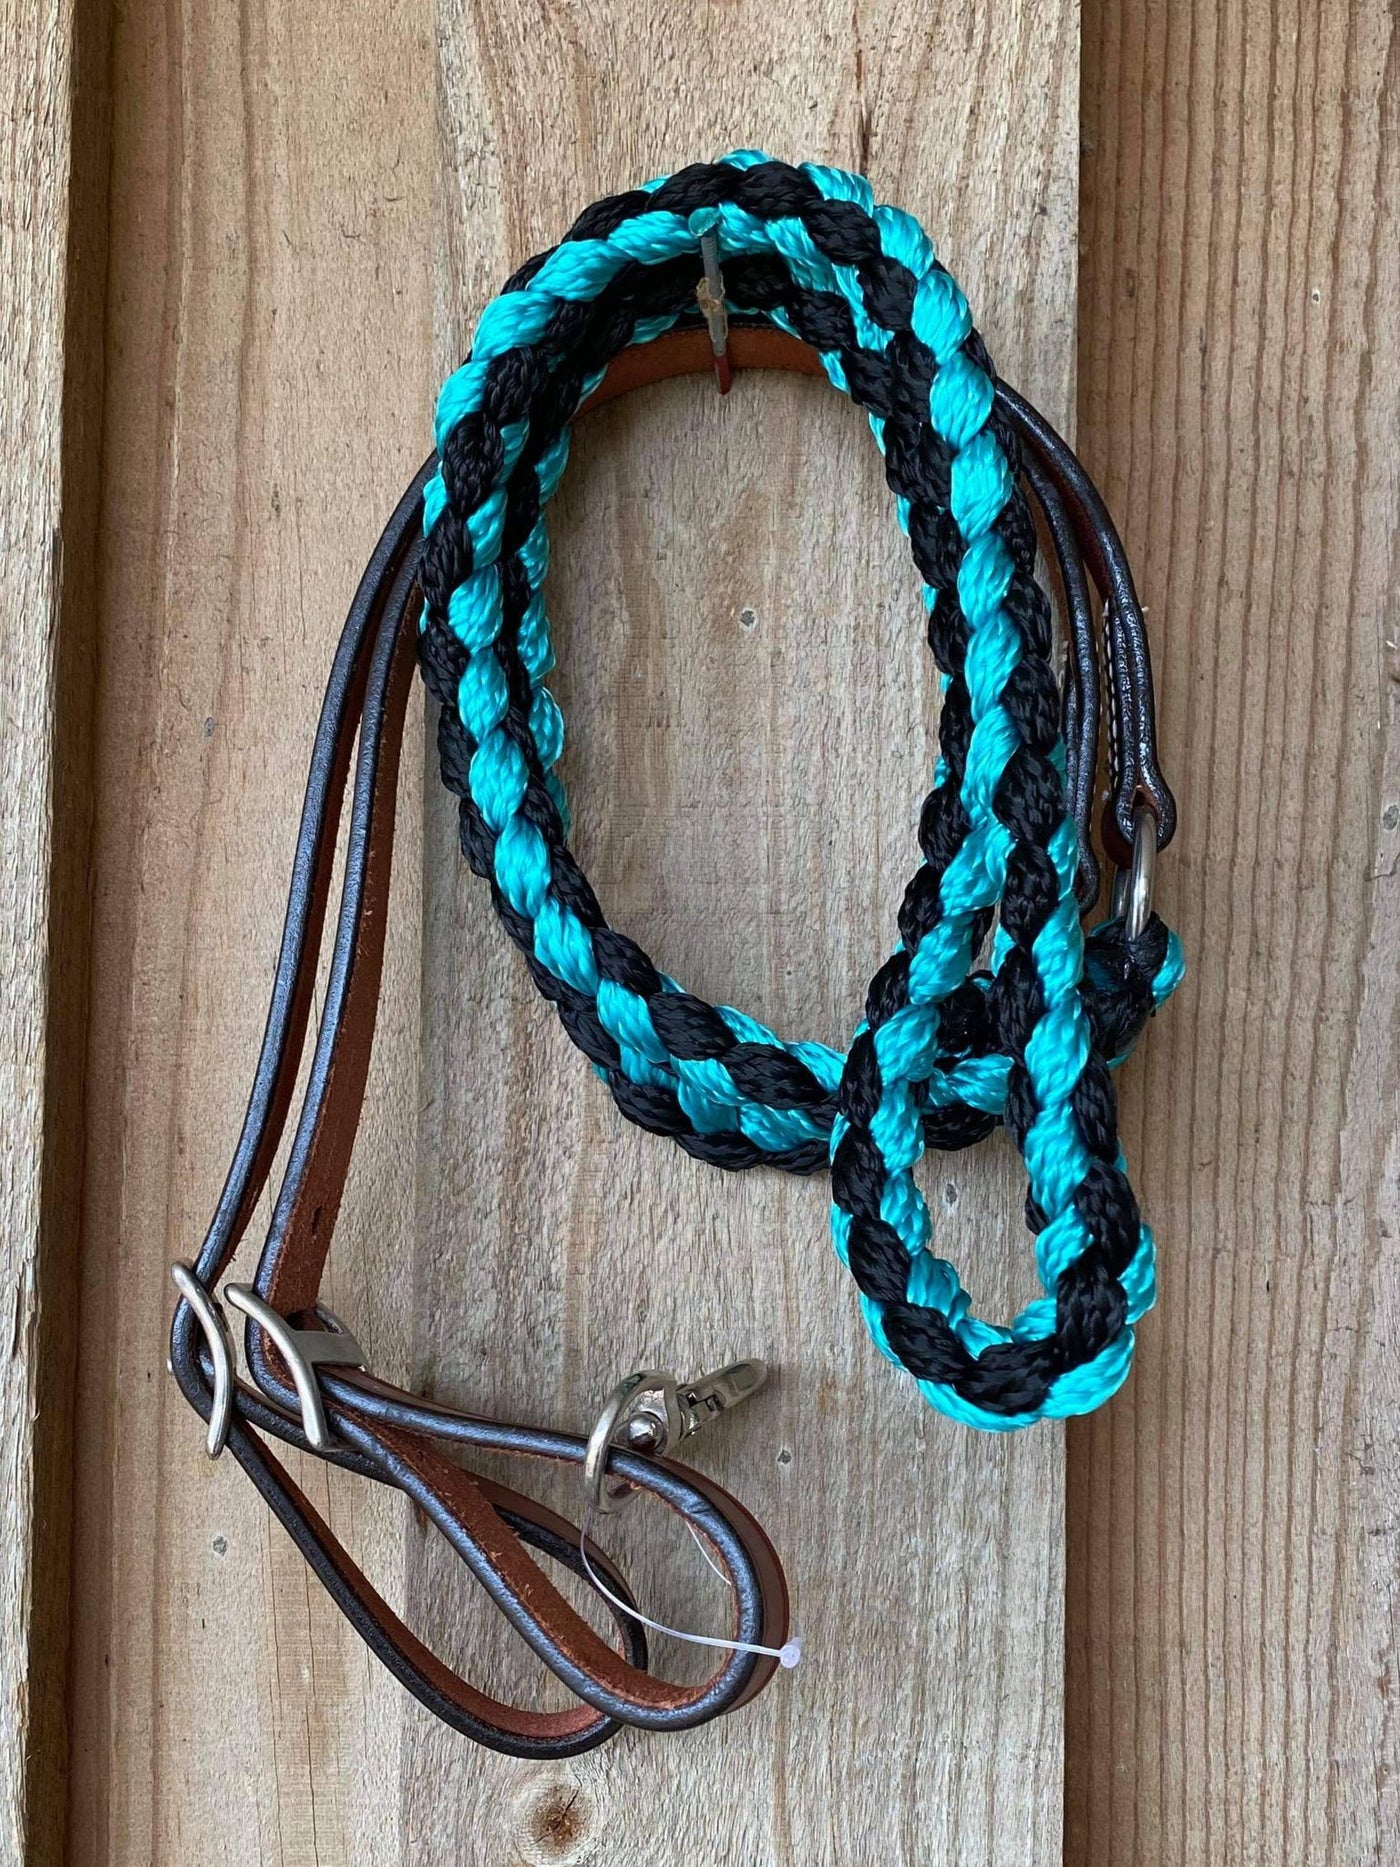 Reins -  8ft Nylon braided roping rein with leather ends